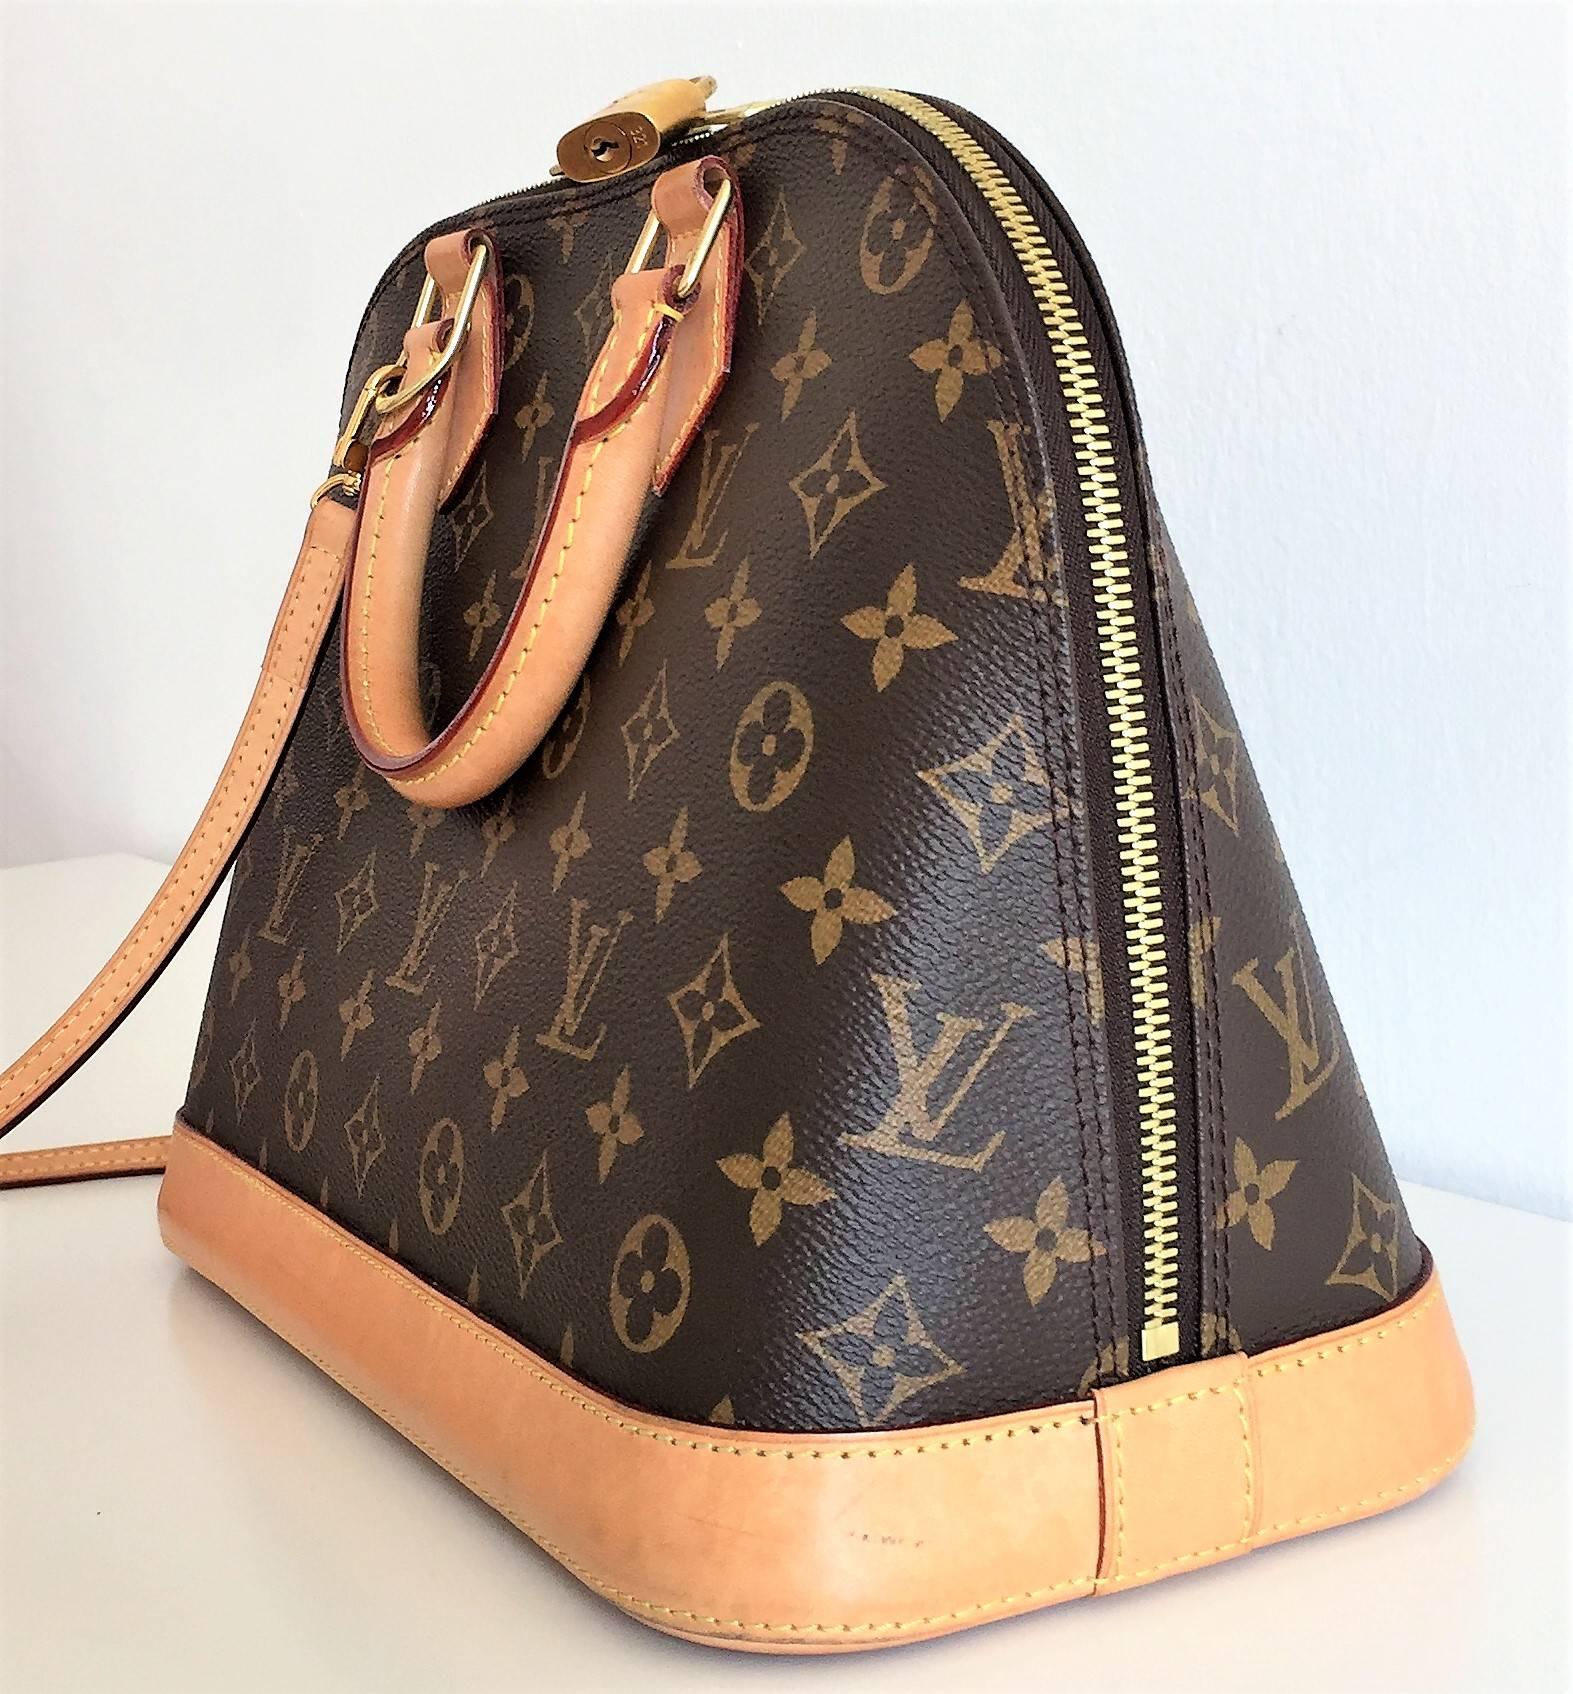 12.6 x 9.4 x 5.9 inches 
(Length x Height x Width) 
- Very good condition with some signs of wear, a little stain in the bottom
- Shoulder strap included
- Leather key bell
- Golden color metallic pieces
- Double zip with padlock closure
- Wide